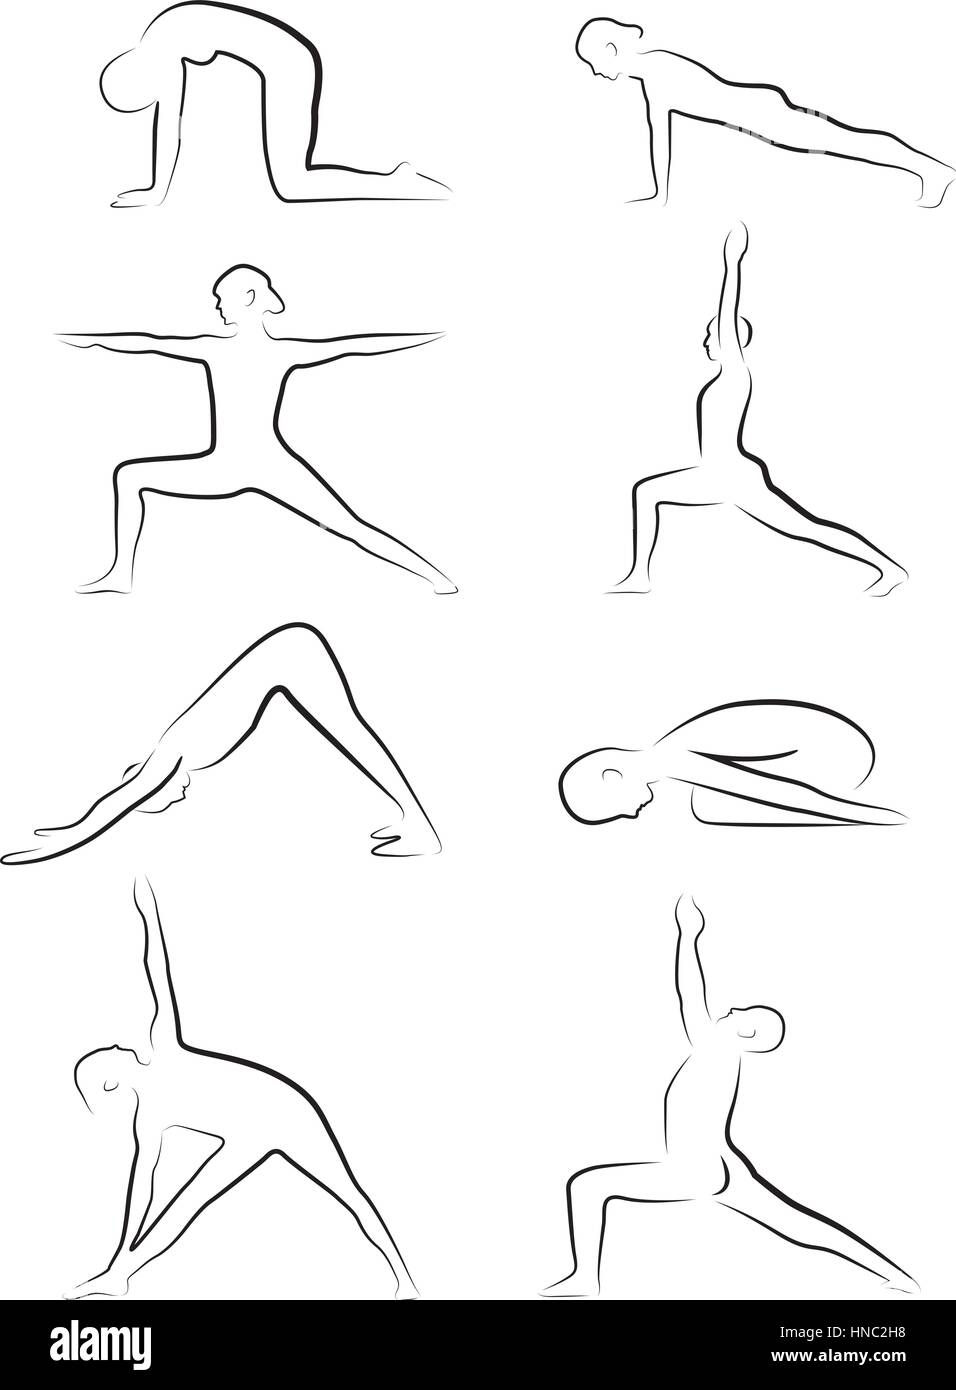 Stylized icon set of yoga poses (Cat, plank, Warrior I, Warrior II, High Lunge, Downward facing dog, Children's and Extended Triangle poses) Stock Vector